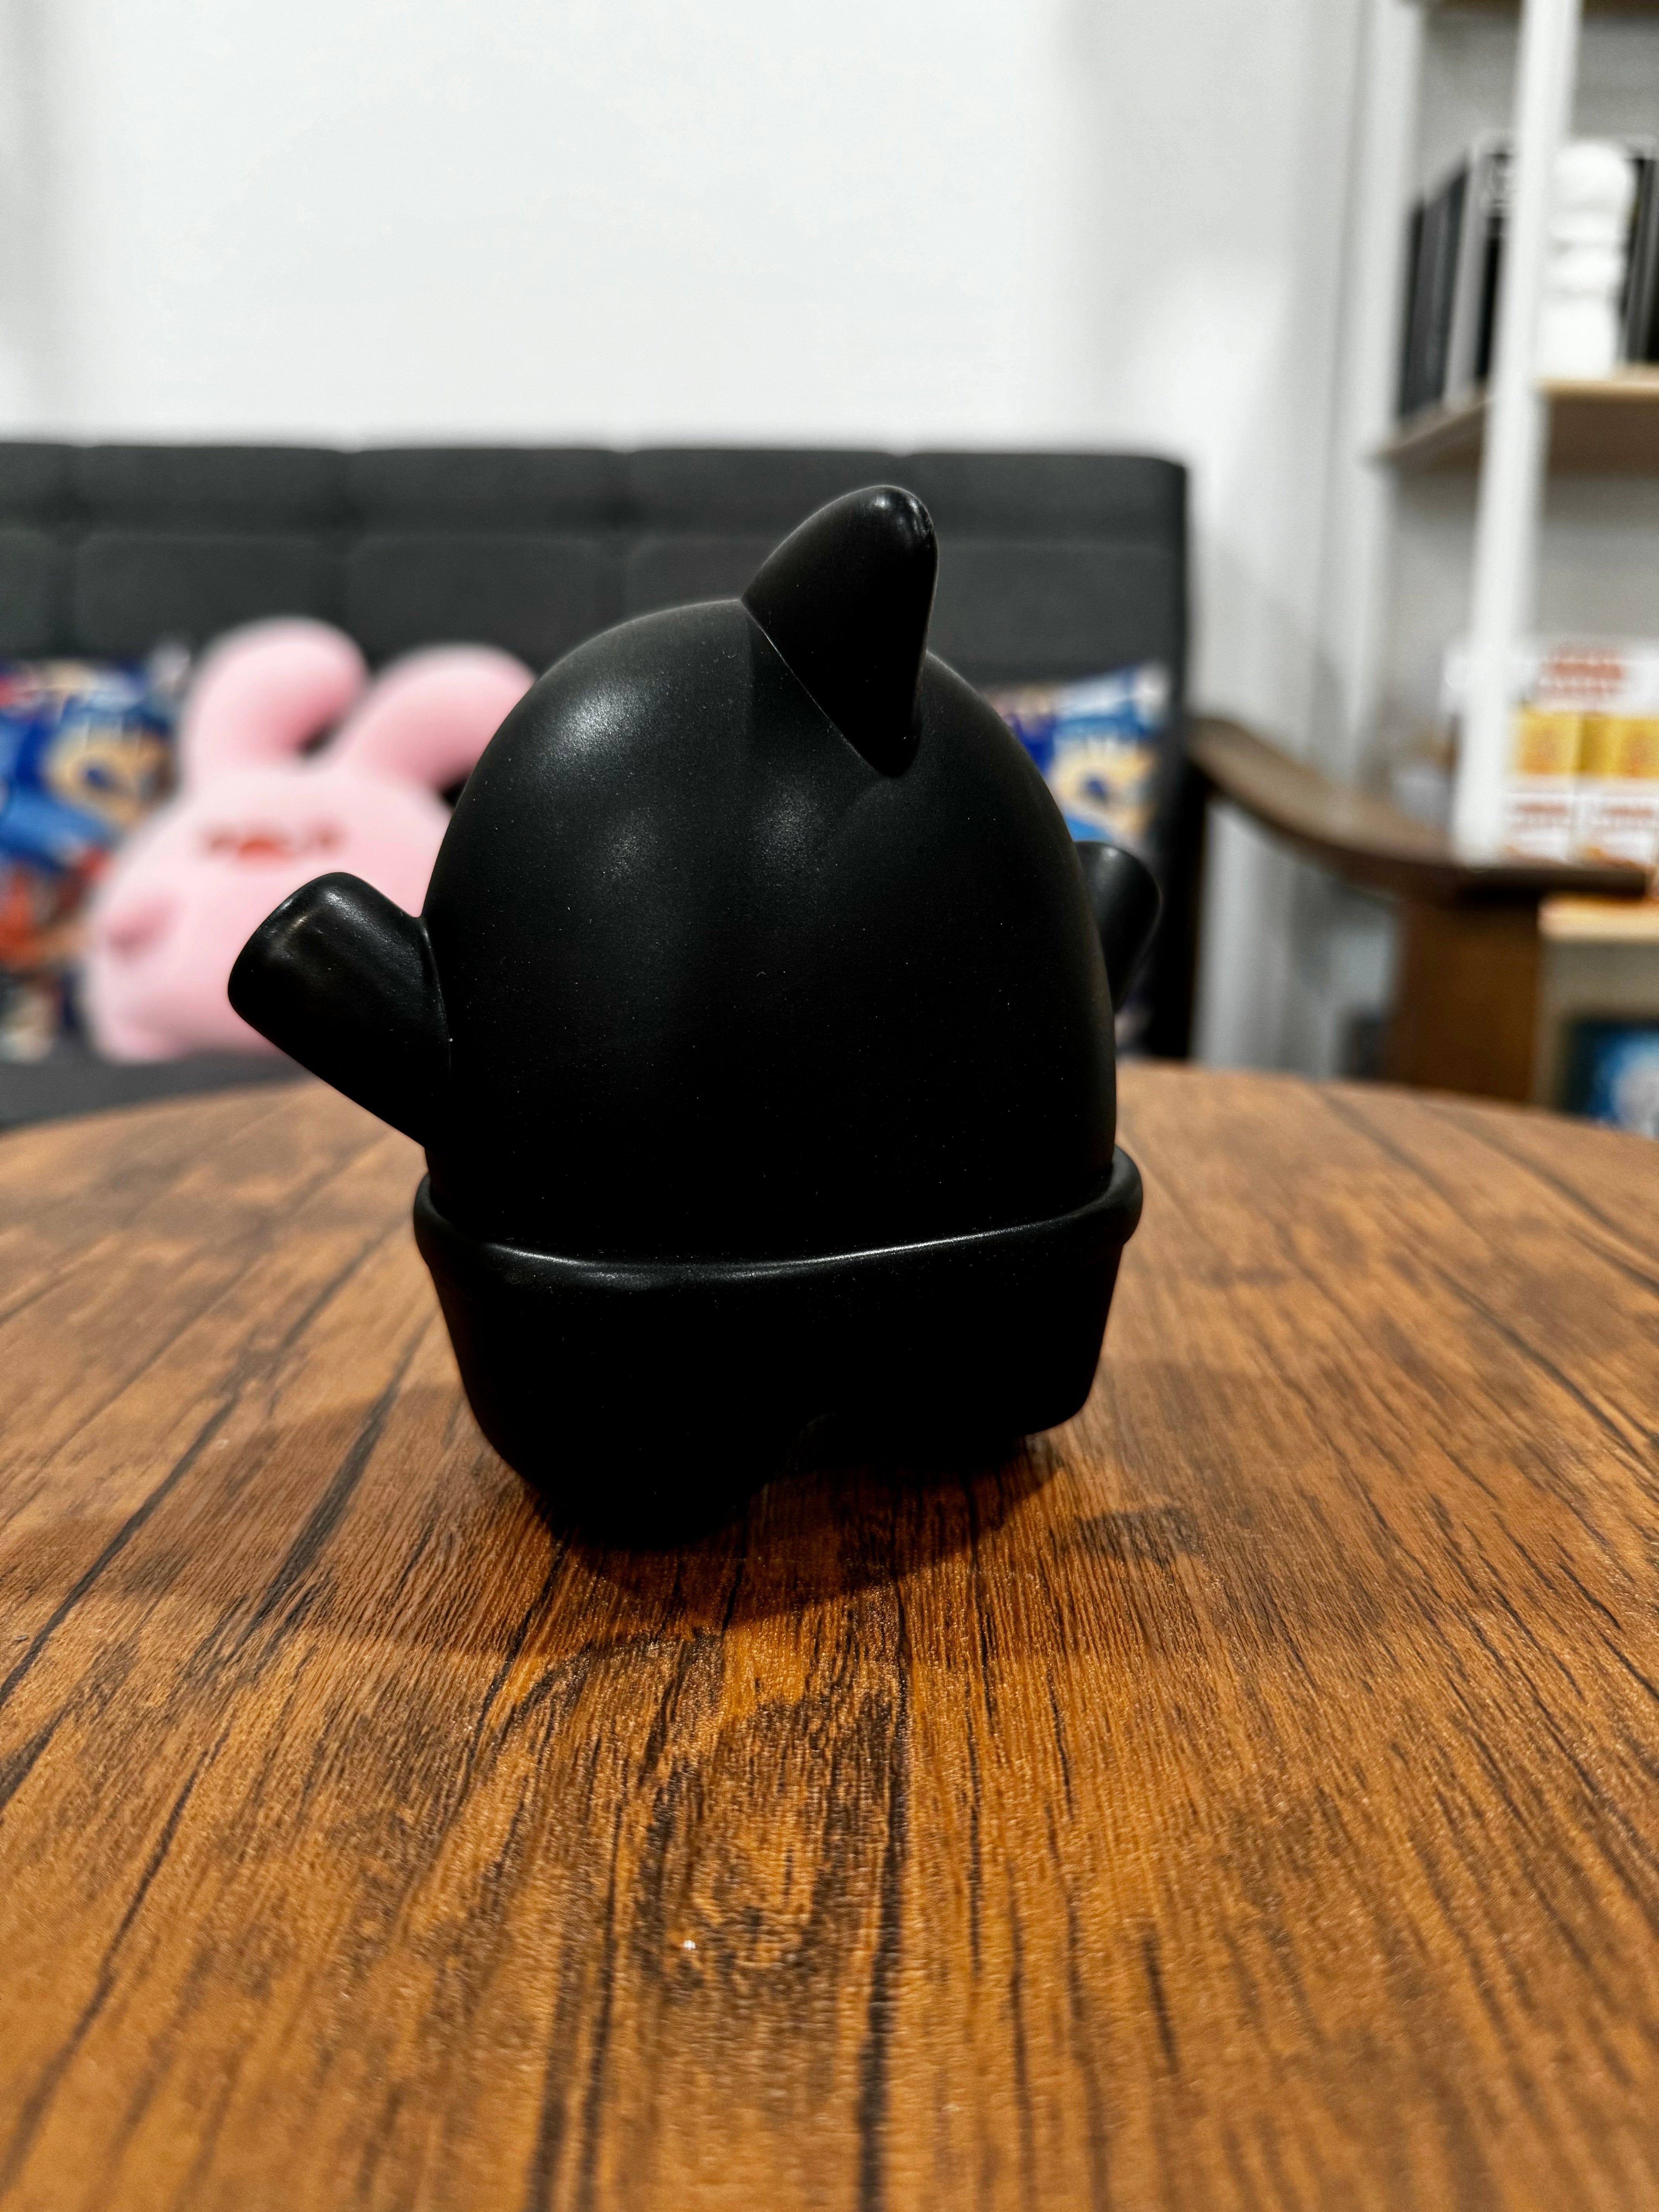 A black toy shark figurine, 11.5cm, titled SHARK Light in the Dark by CO2, showcased on a table. Reflects Strangecat Toys' blind box and art toy store essence.